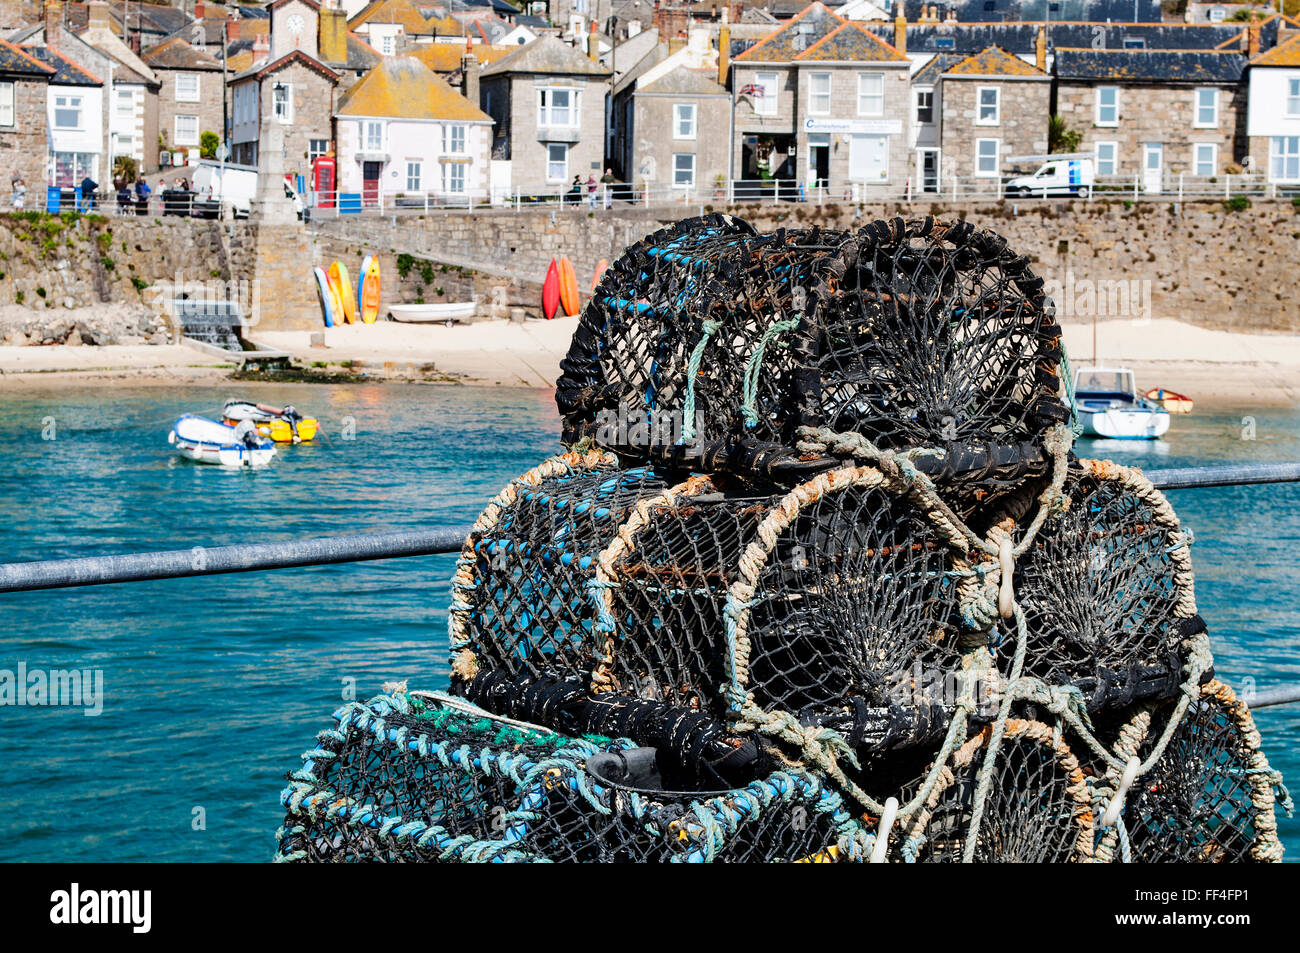 Crab/Lobster pots on the quayside at Mousehole in Cornwall, UK Stock Photo